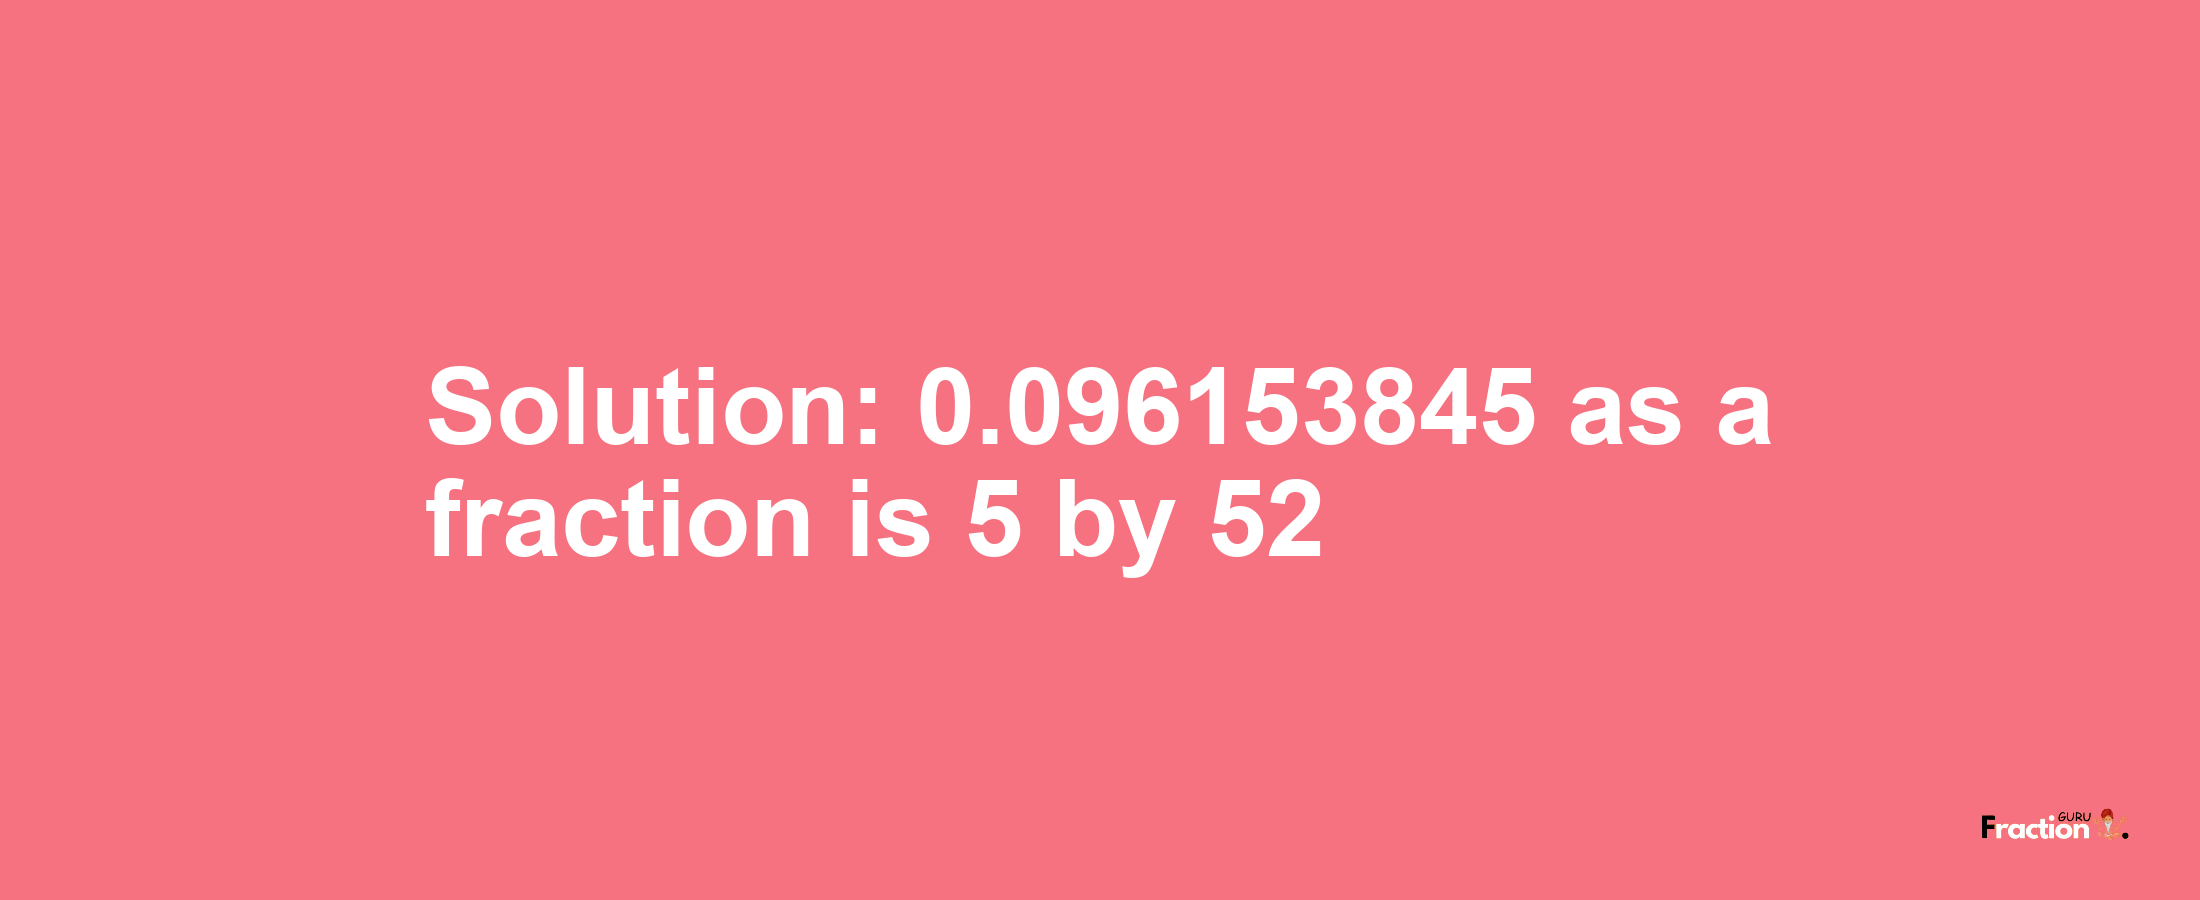 Solution:0.096153845 as a fraction is 5/52